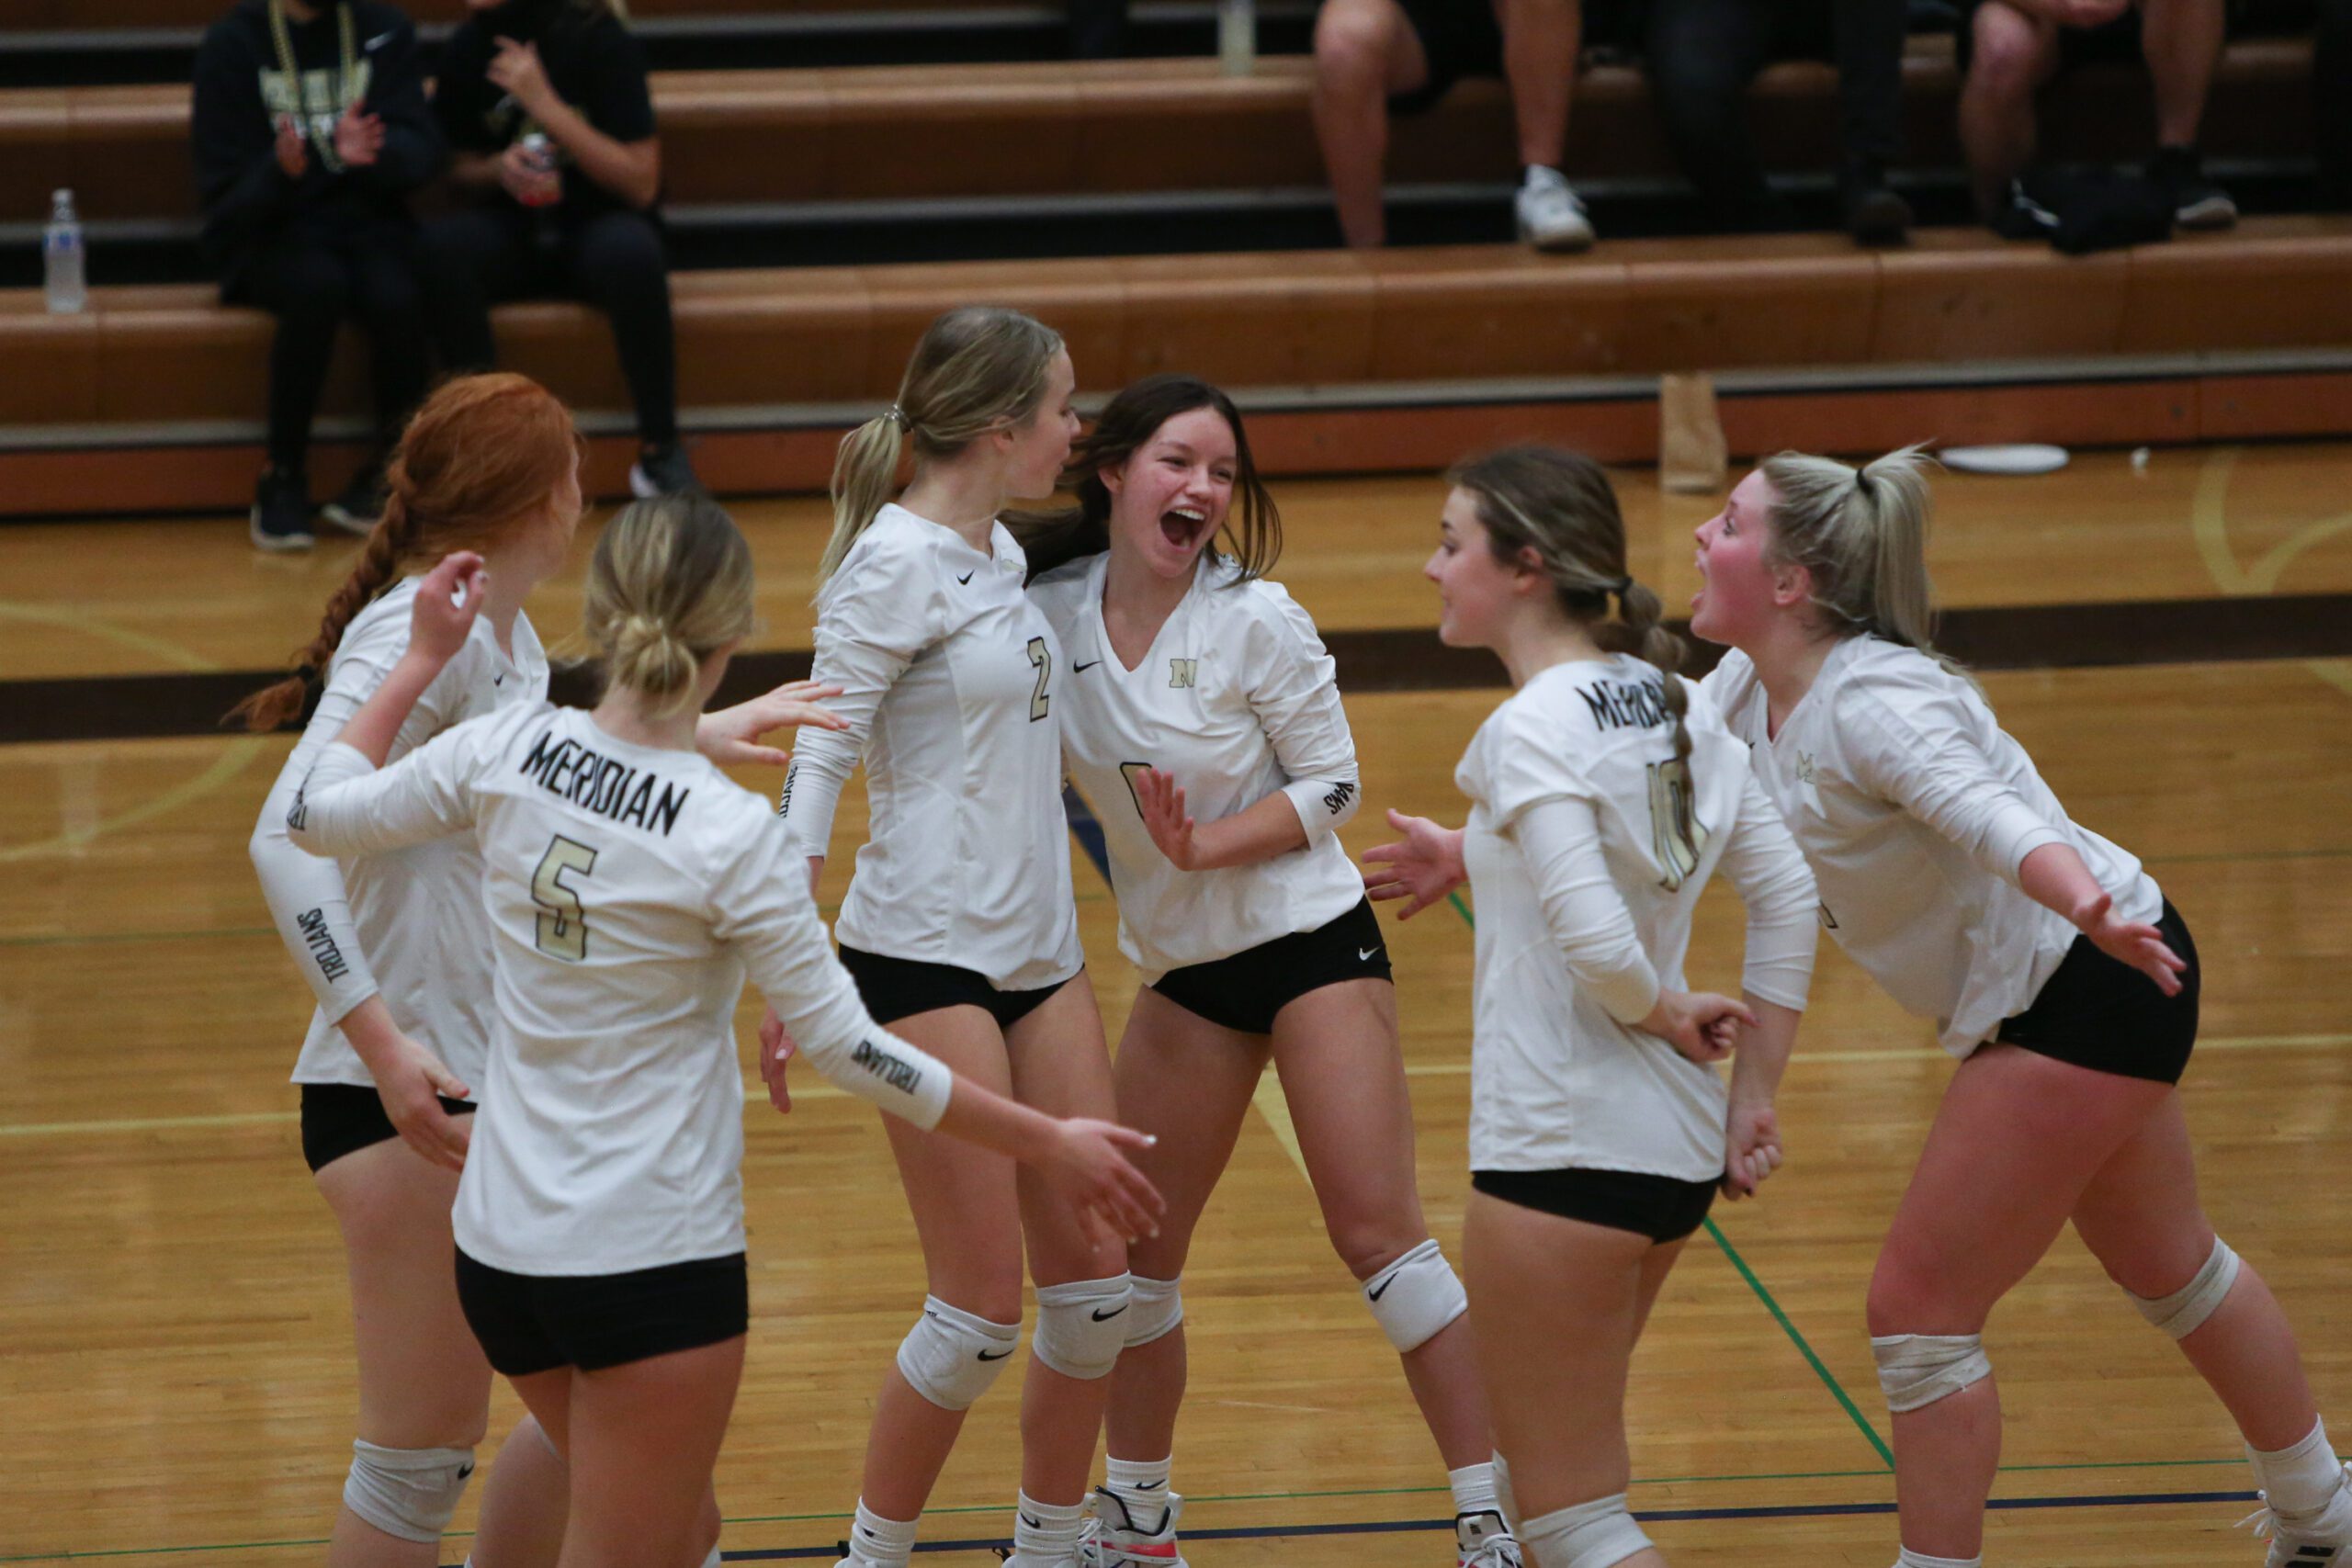 The Meridian volleyball team celebrates a point in their match against Lynden on Oct. 19